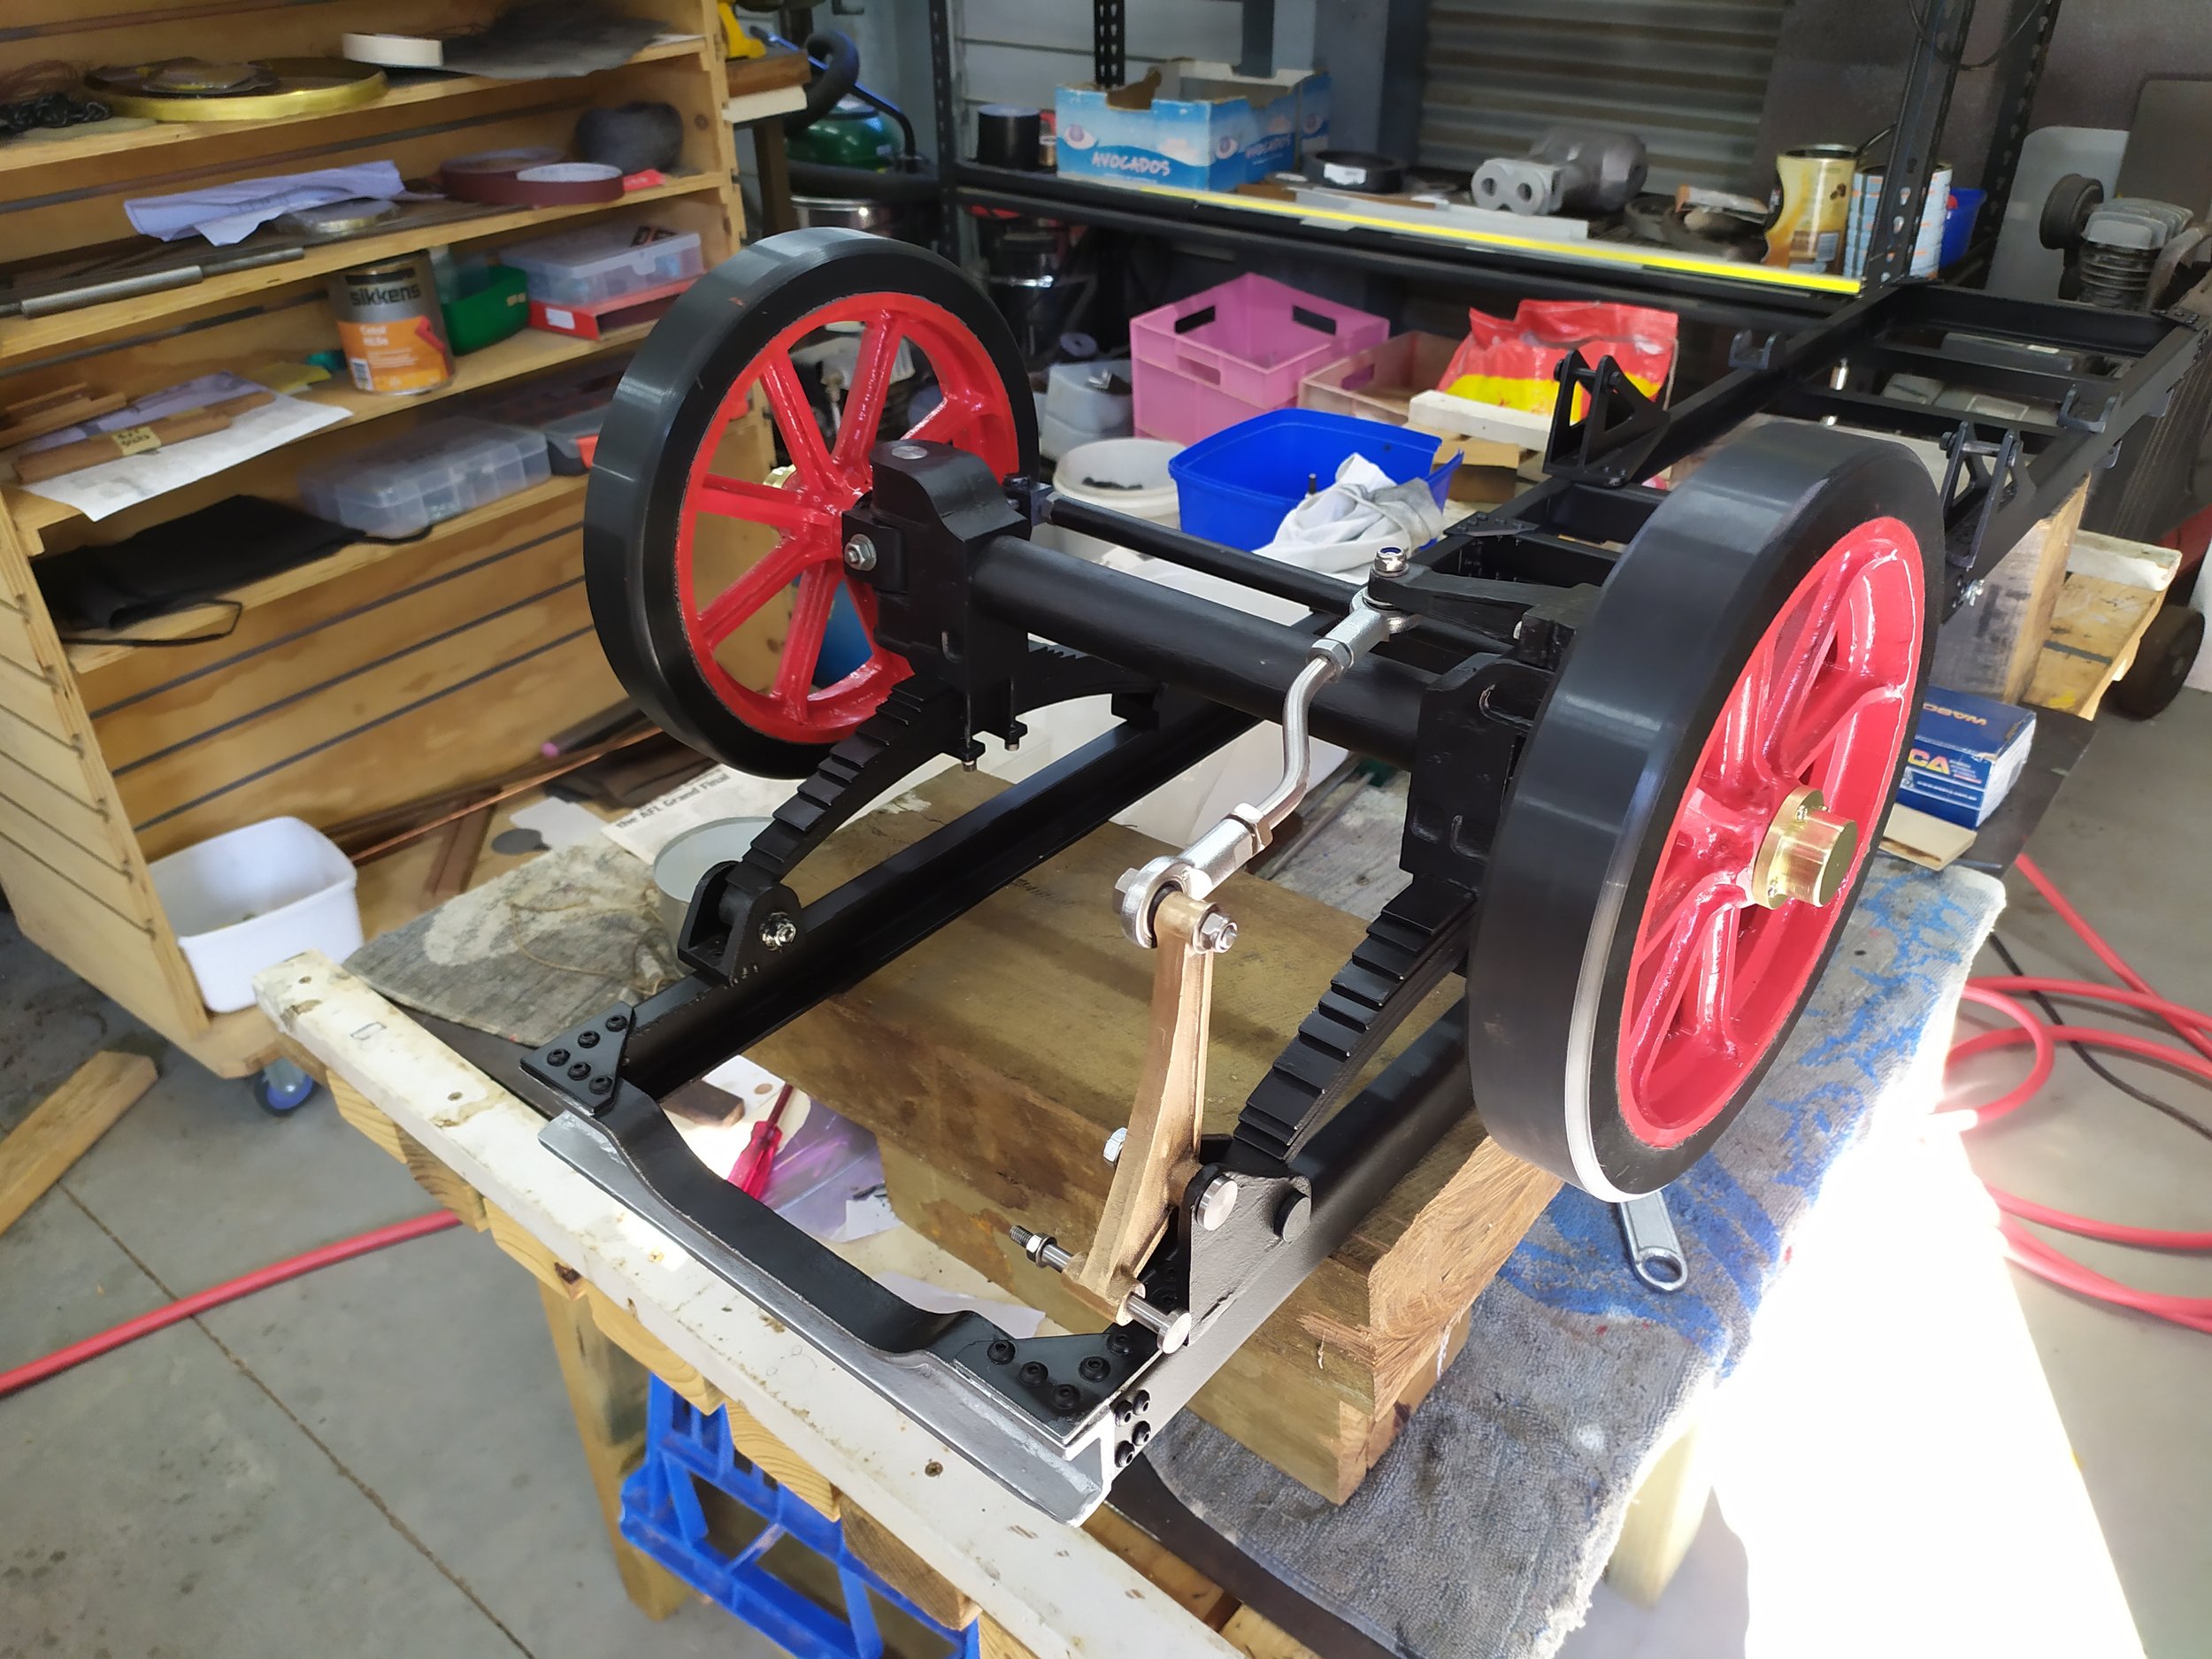  14. Wheels and steering fitted 